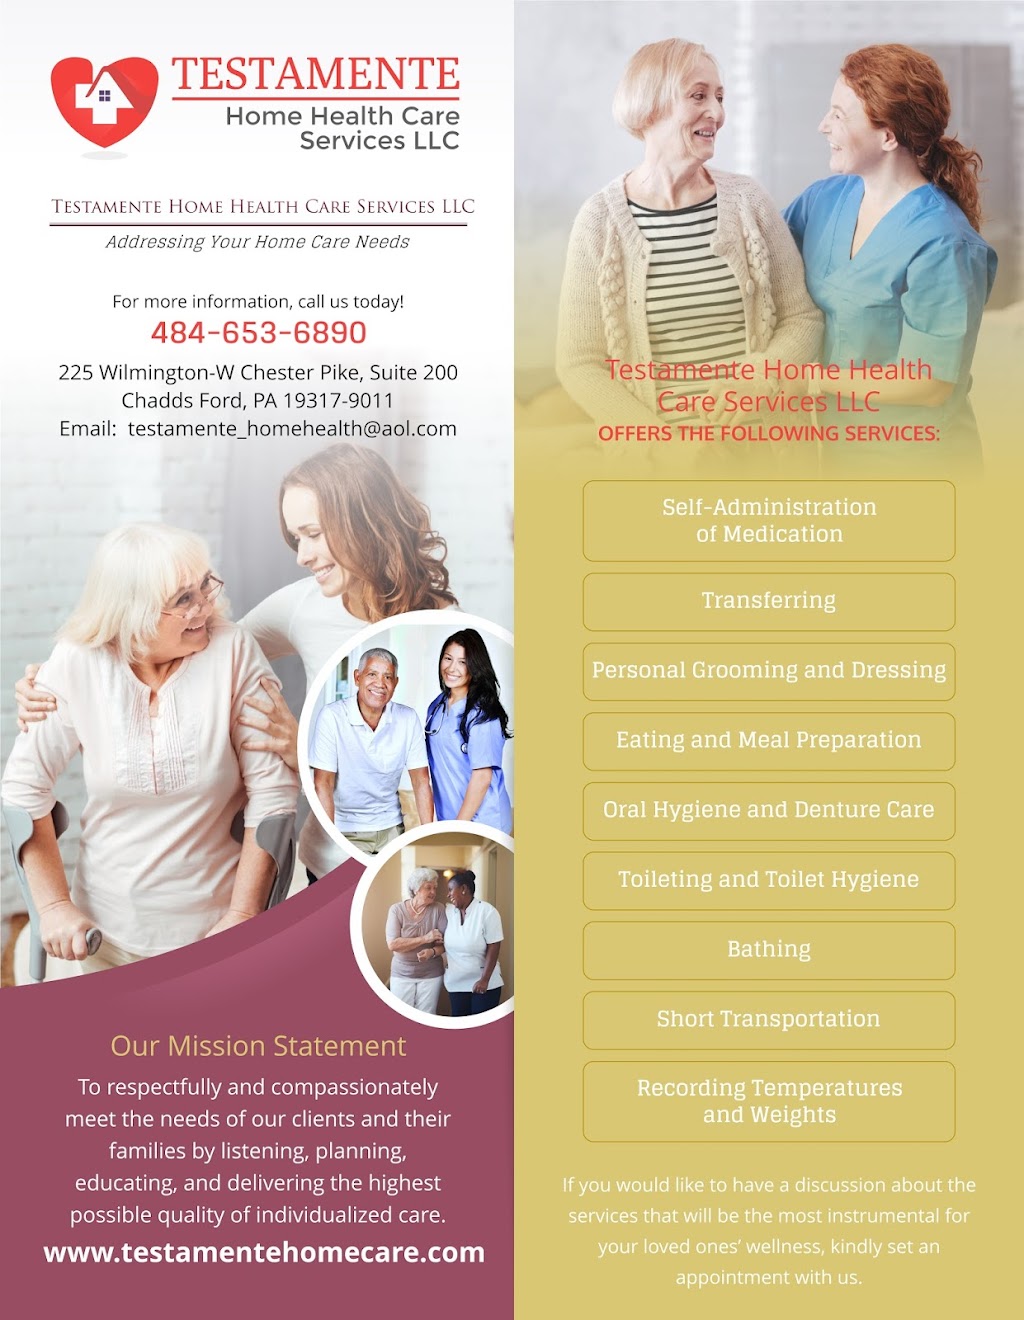 TESTAMENTE HOME HEALTH CARE SERVICES LLC | 225 Wilmington West Chester Pike #200, Chadds Ford, PA 19317 | Phone: (484) 653-6890